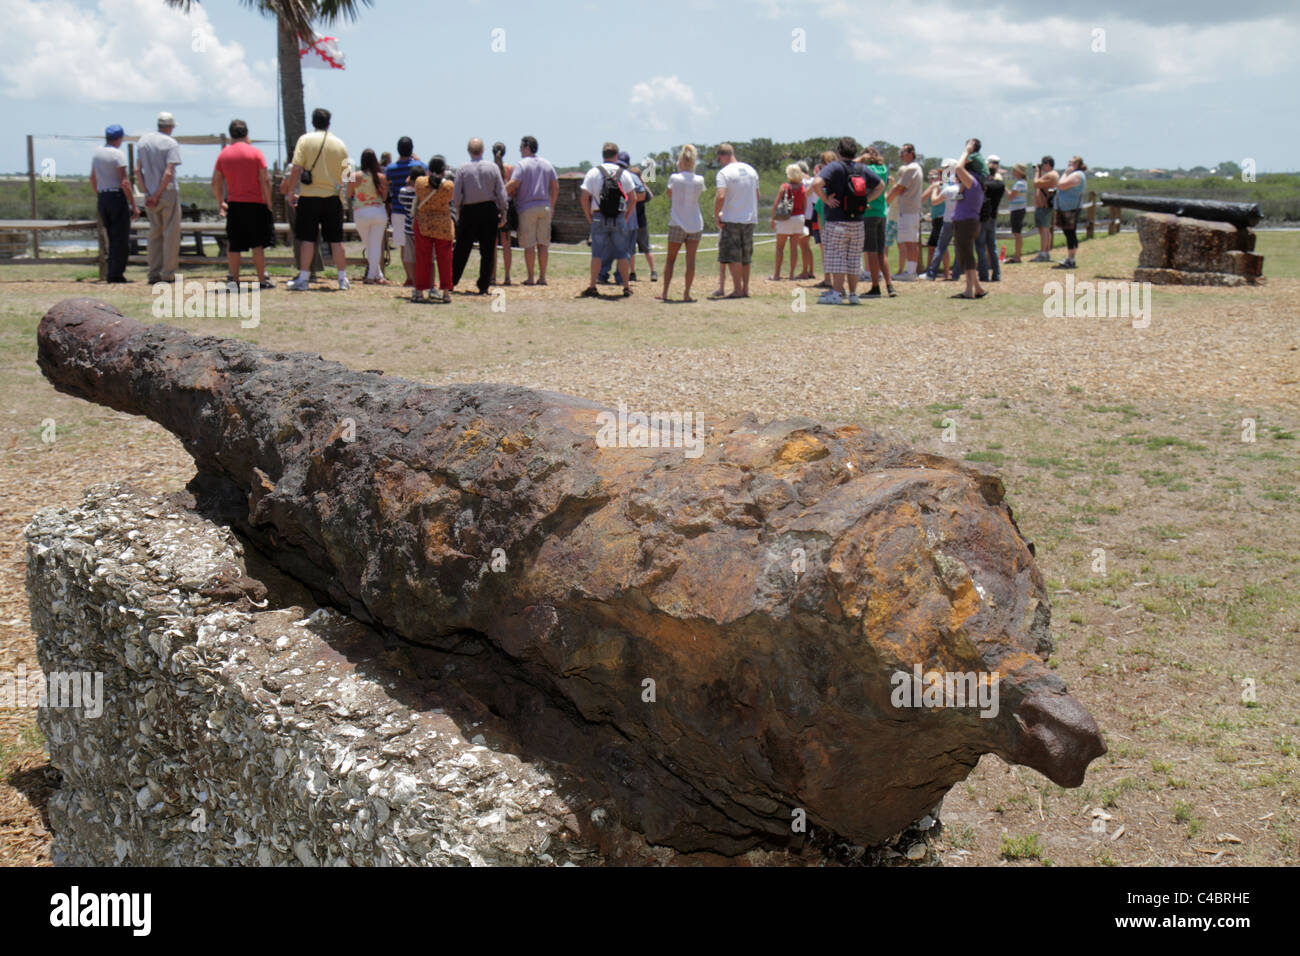 St. Saint Augustine Florida,Fountain of Youth Archaeological Park,original Spanish settlement site,cannon firing demonstration,group,rusted,tabby,visi Stock Photo